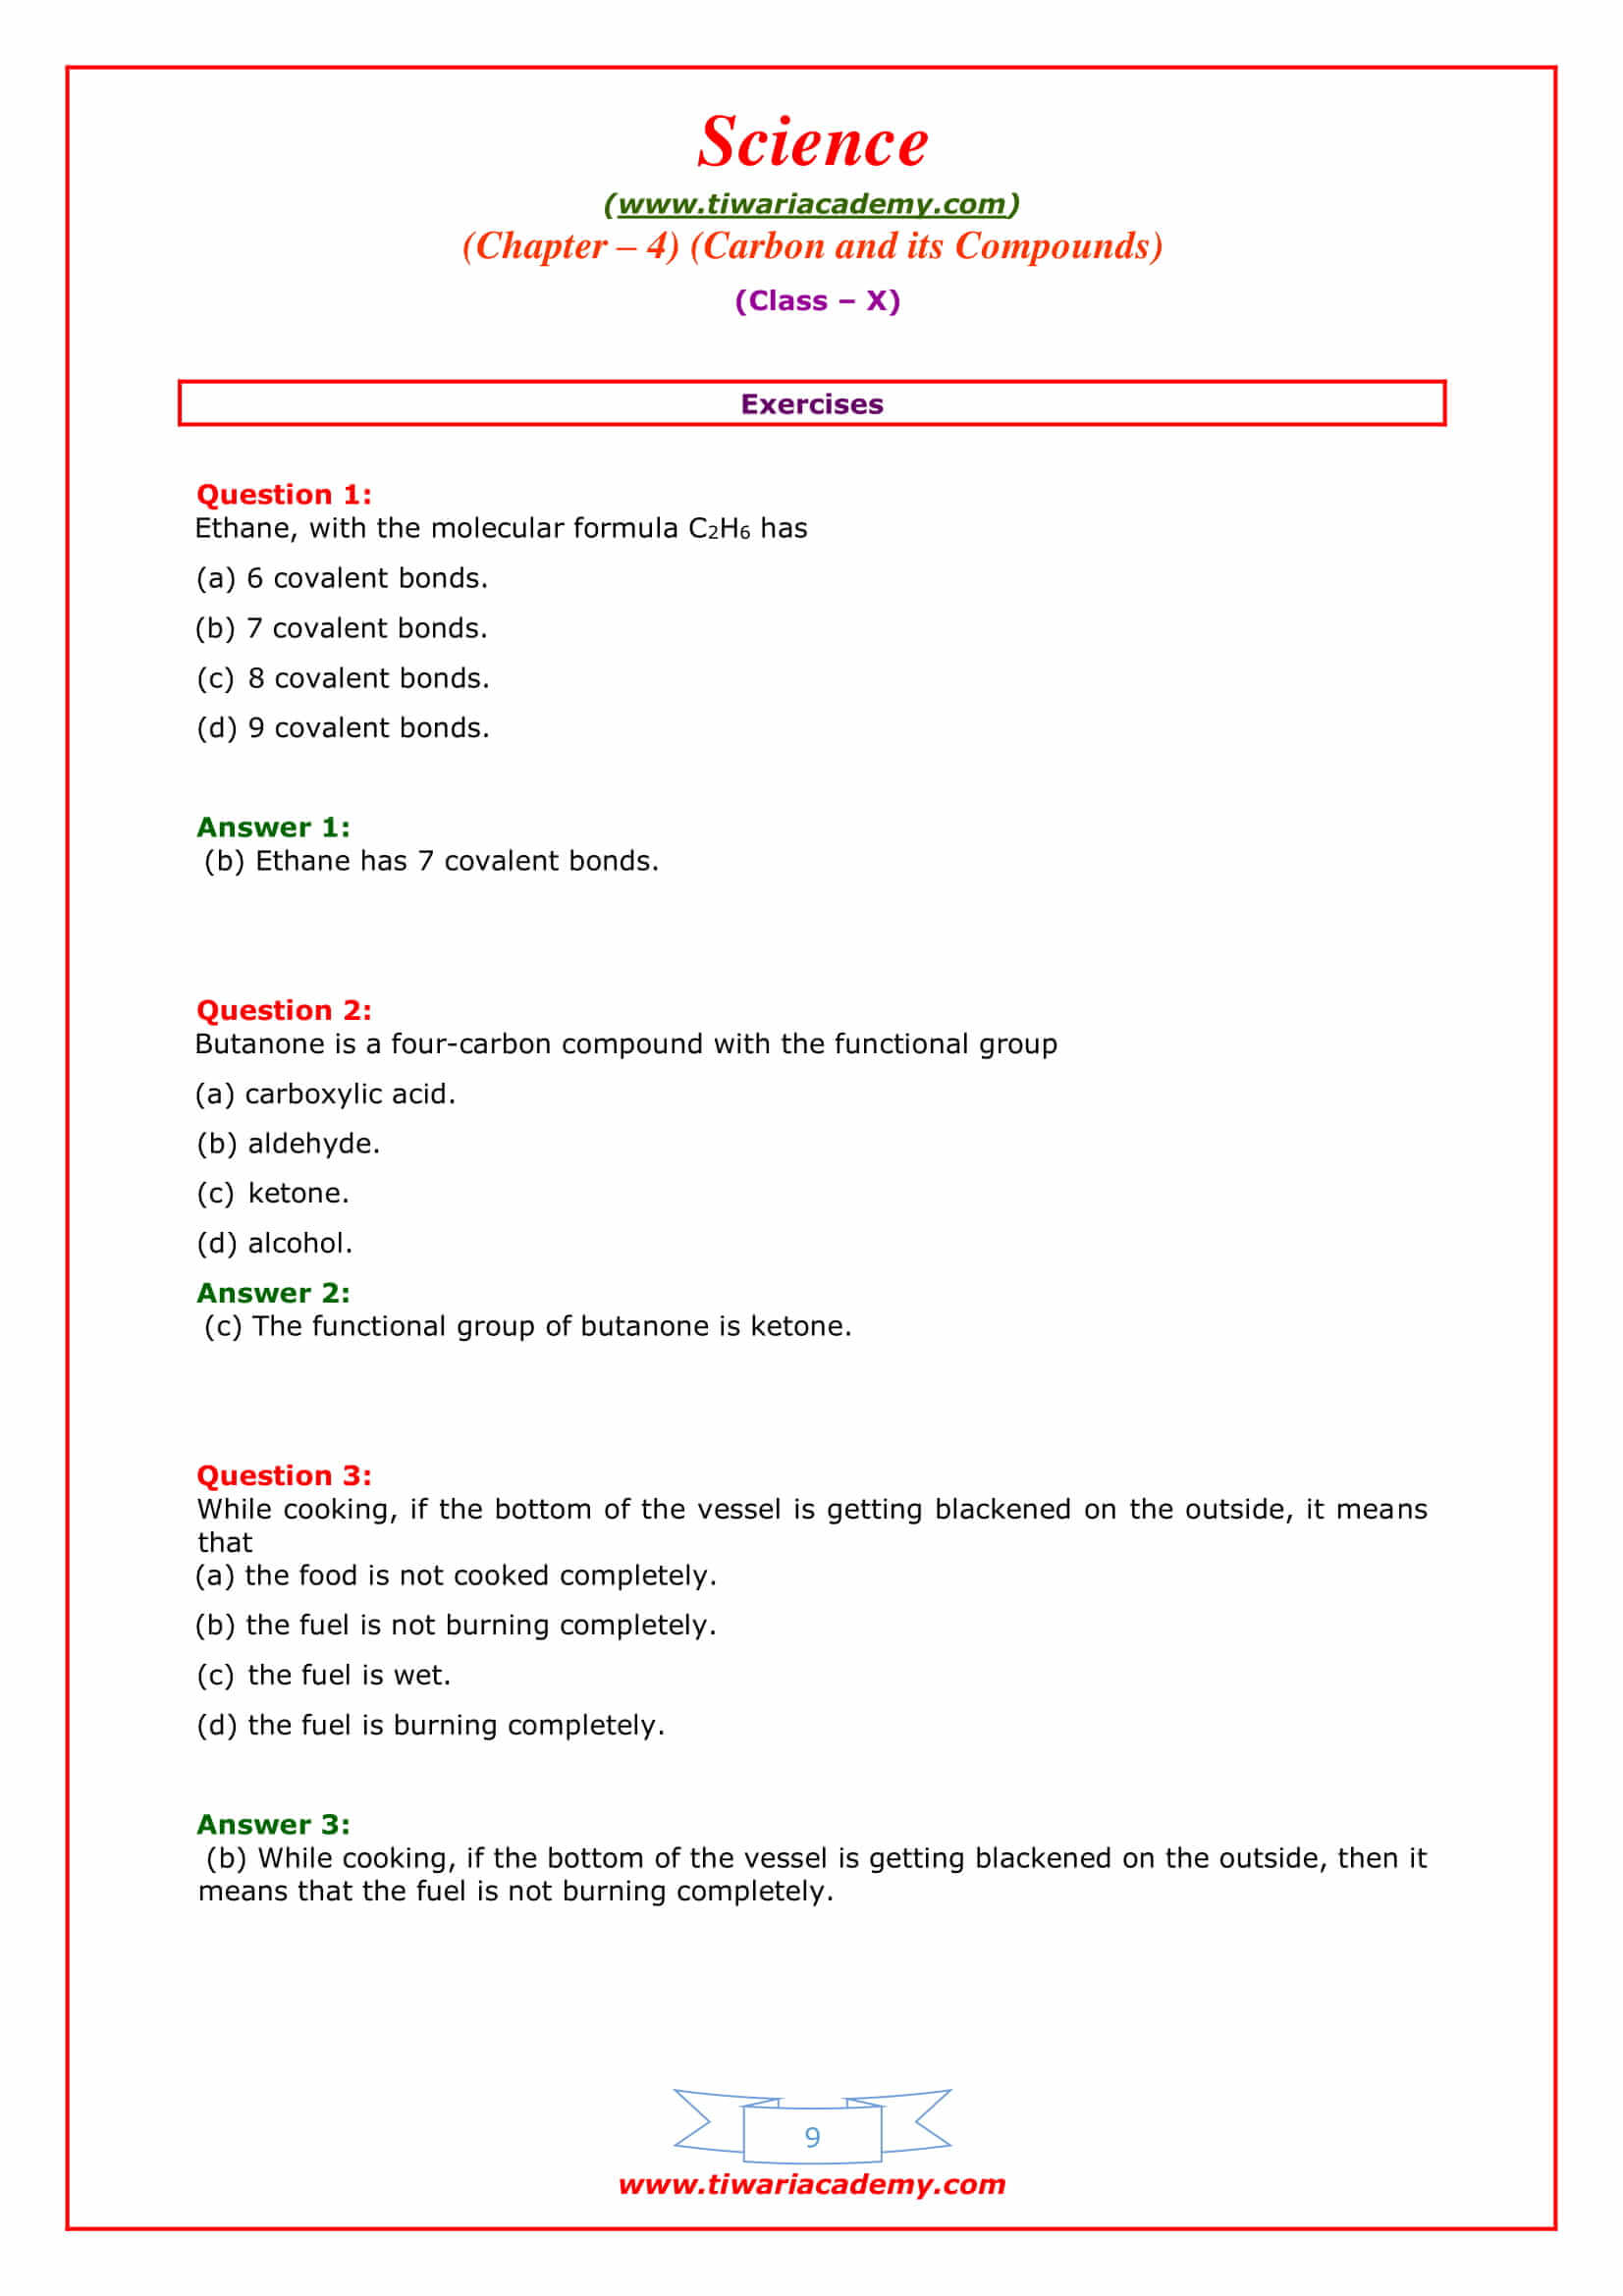 NCERT Solutions for Class 10 Science Chapter 4 Carbon and its compounds Exercises